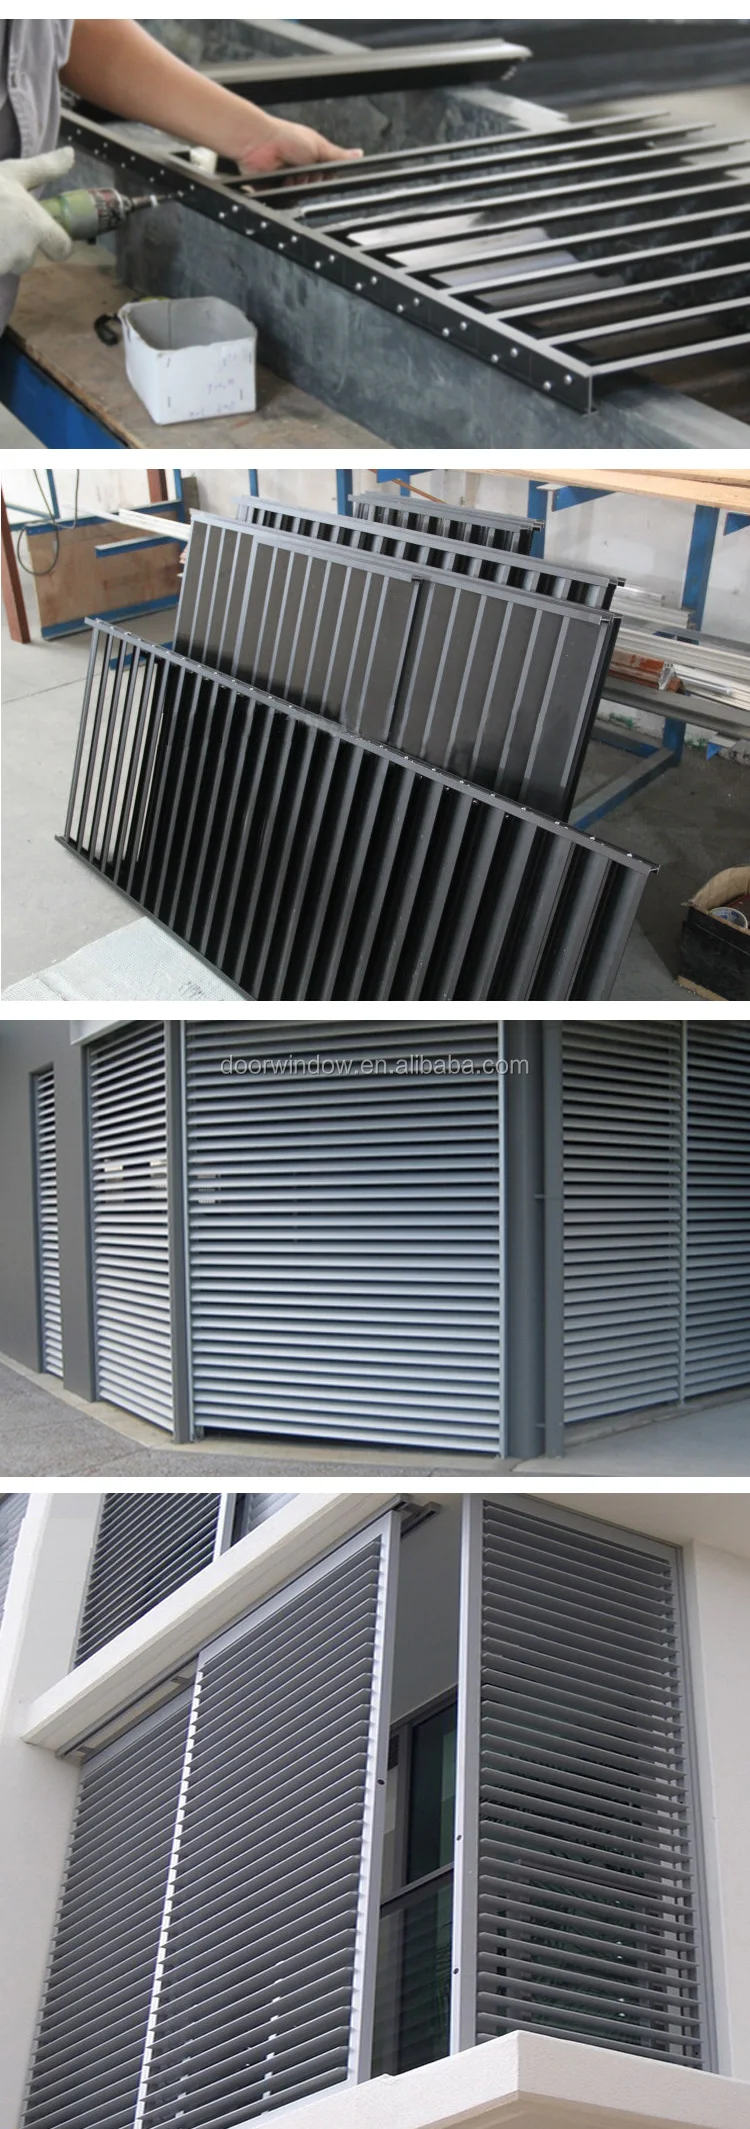 Wood shutter window with roller and mosquito net nets louvers